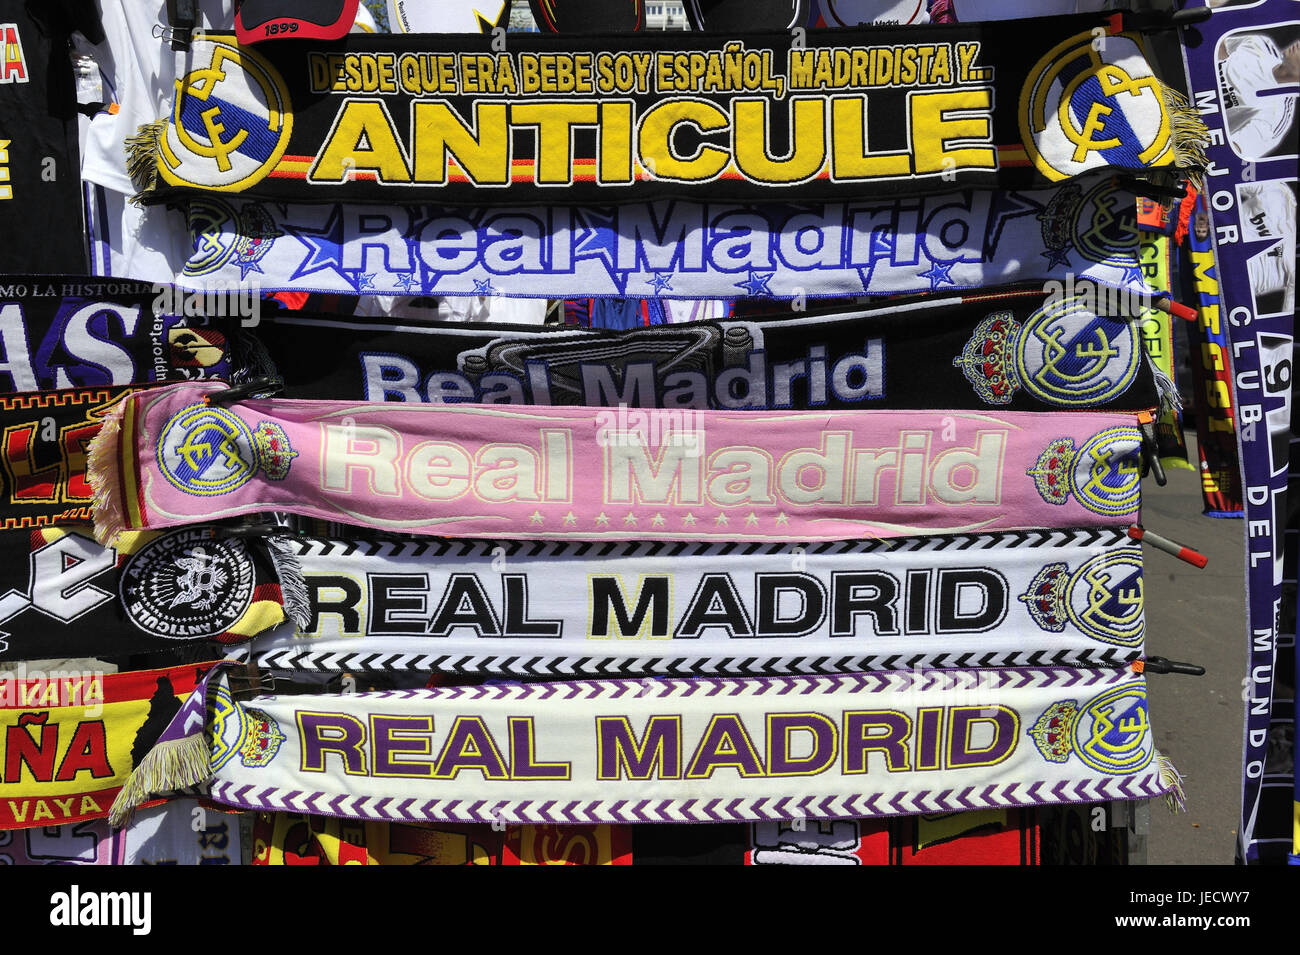 Spain, Madrid, fan article, different scarfs, Stock Photo